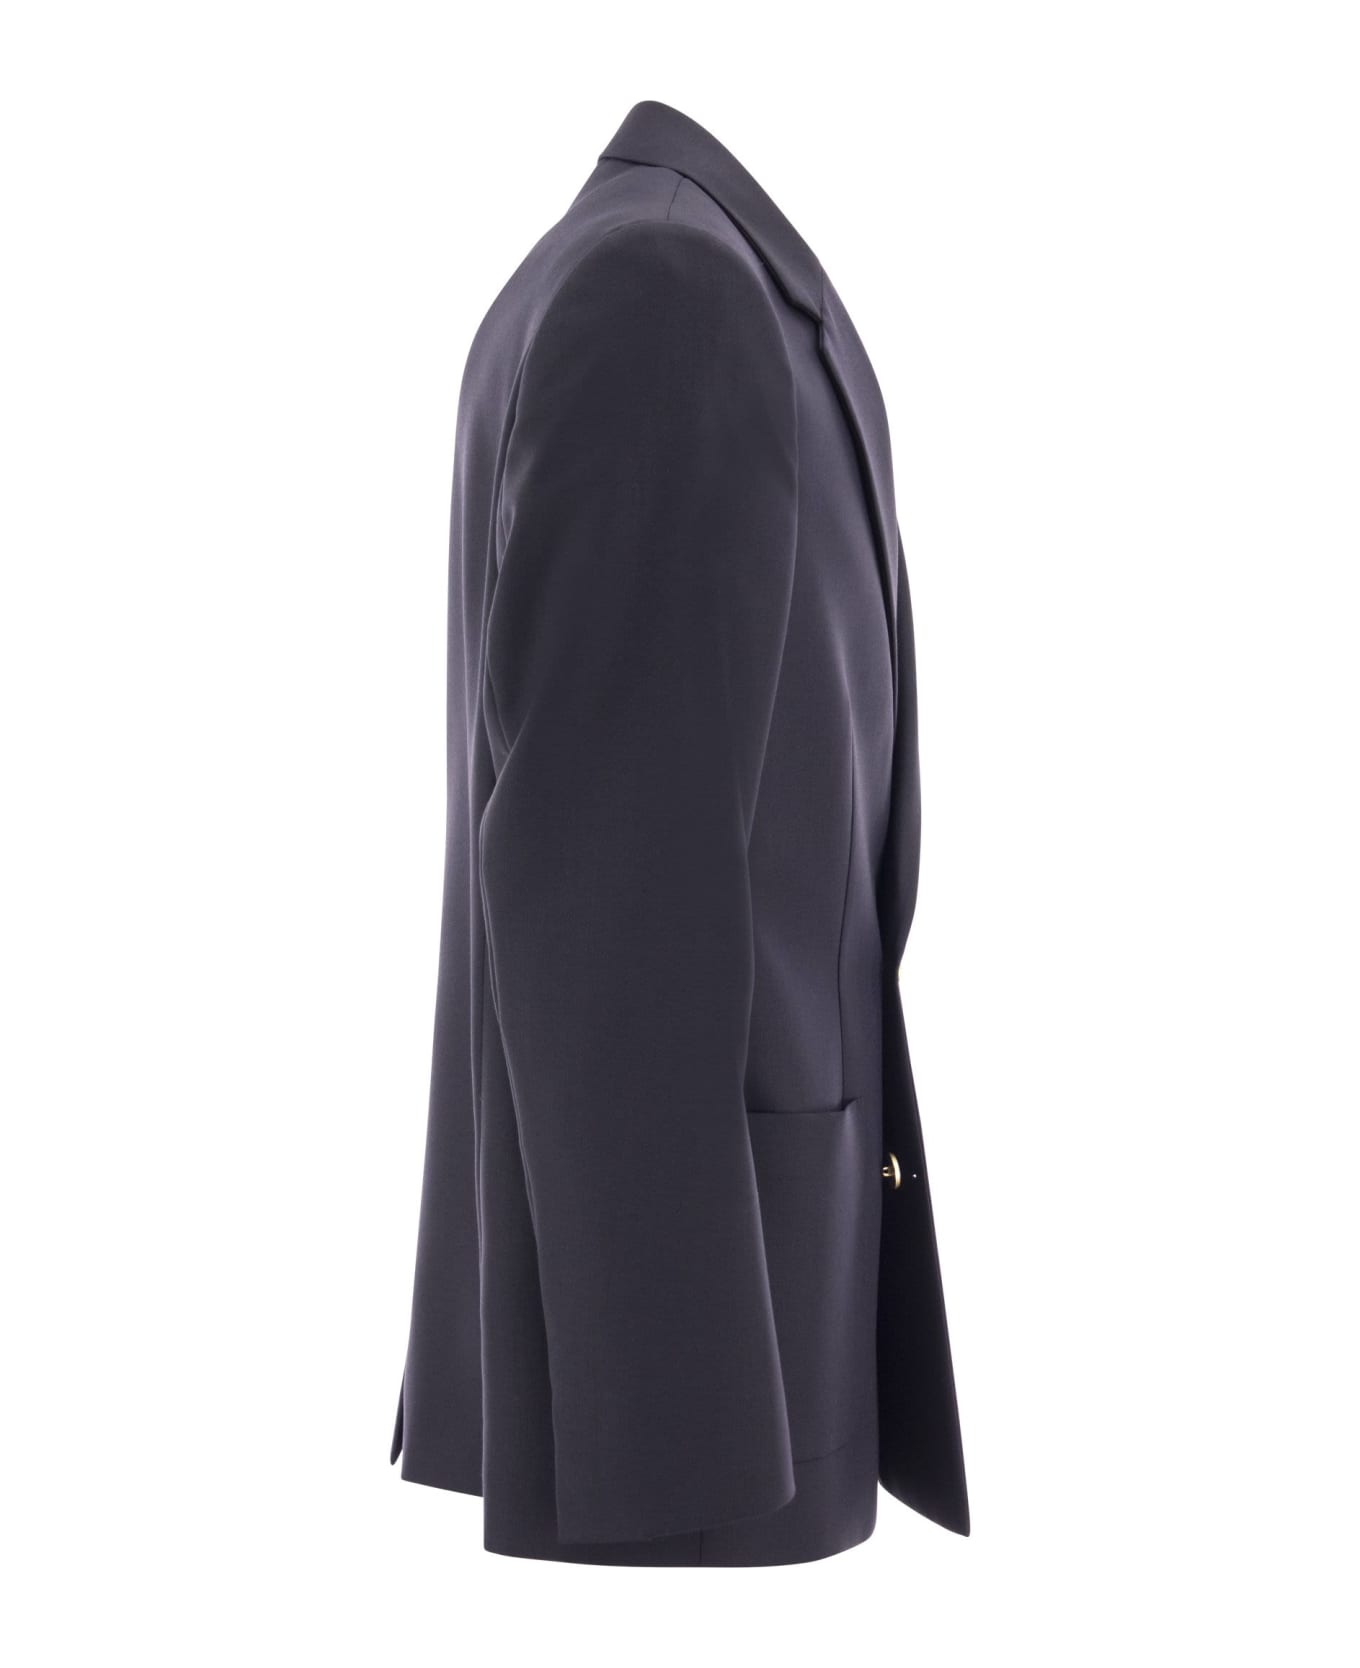 PT Torino Double-breasted Jacket In Wool Blend - Navy